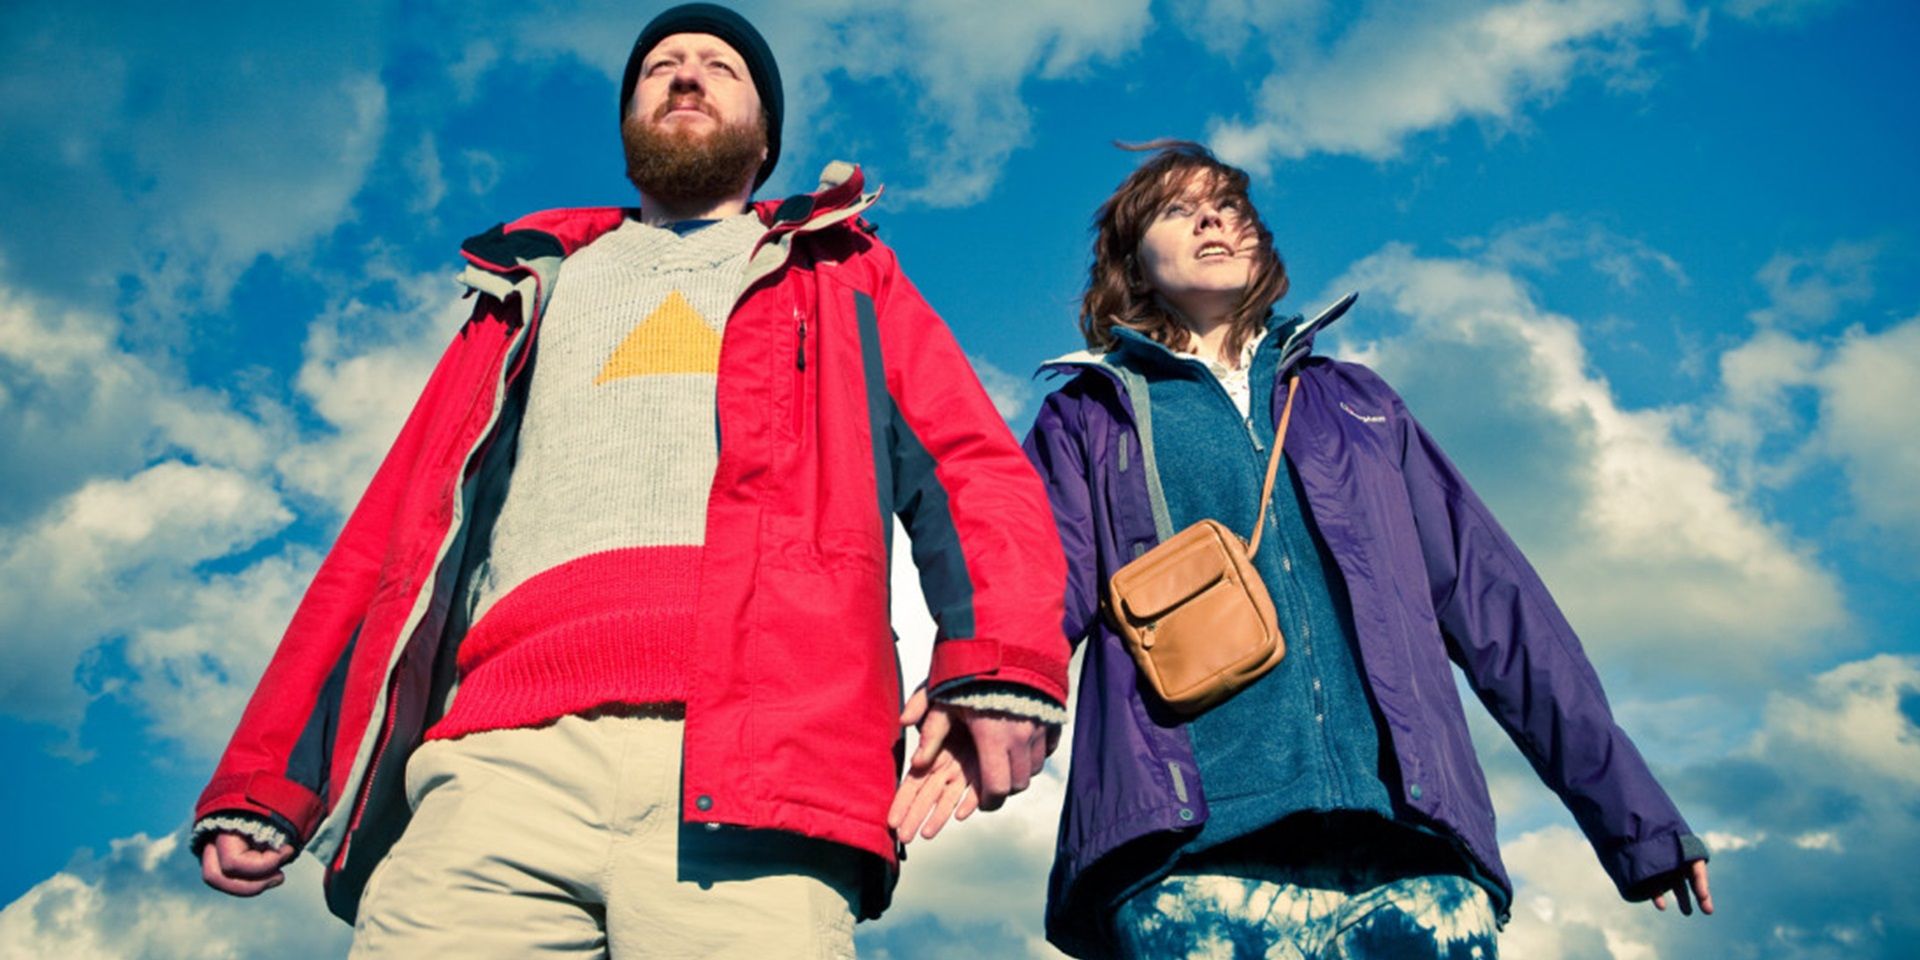 Chris and Tina in a low angle in Sightseers